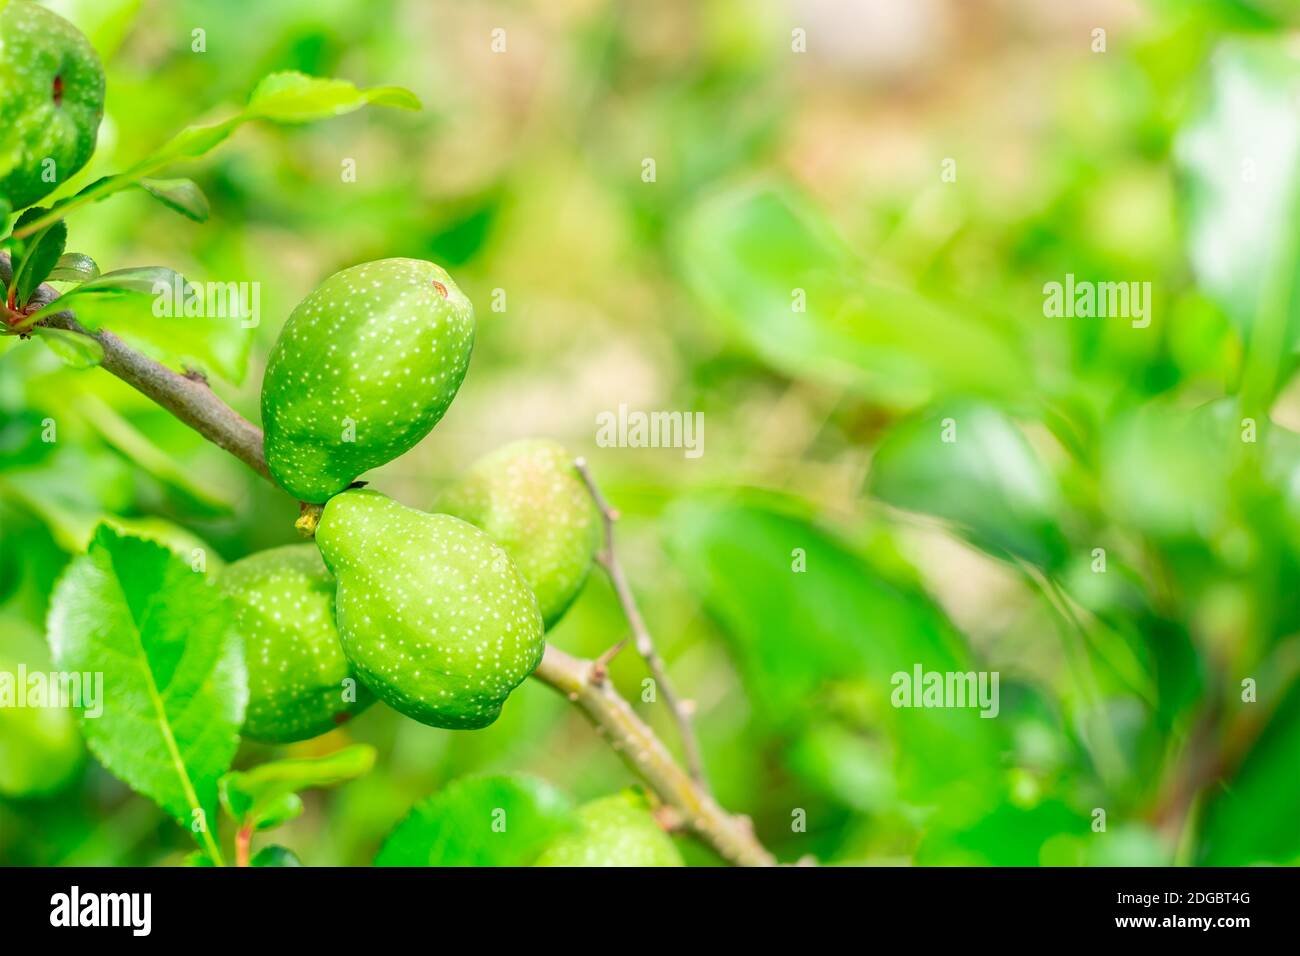 Pair of green unripe pears growing on a tree branch with copy space Stock Photo